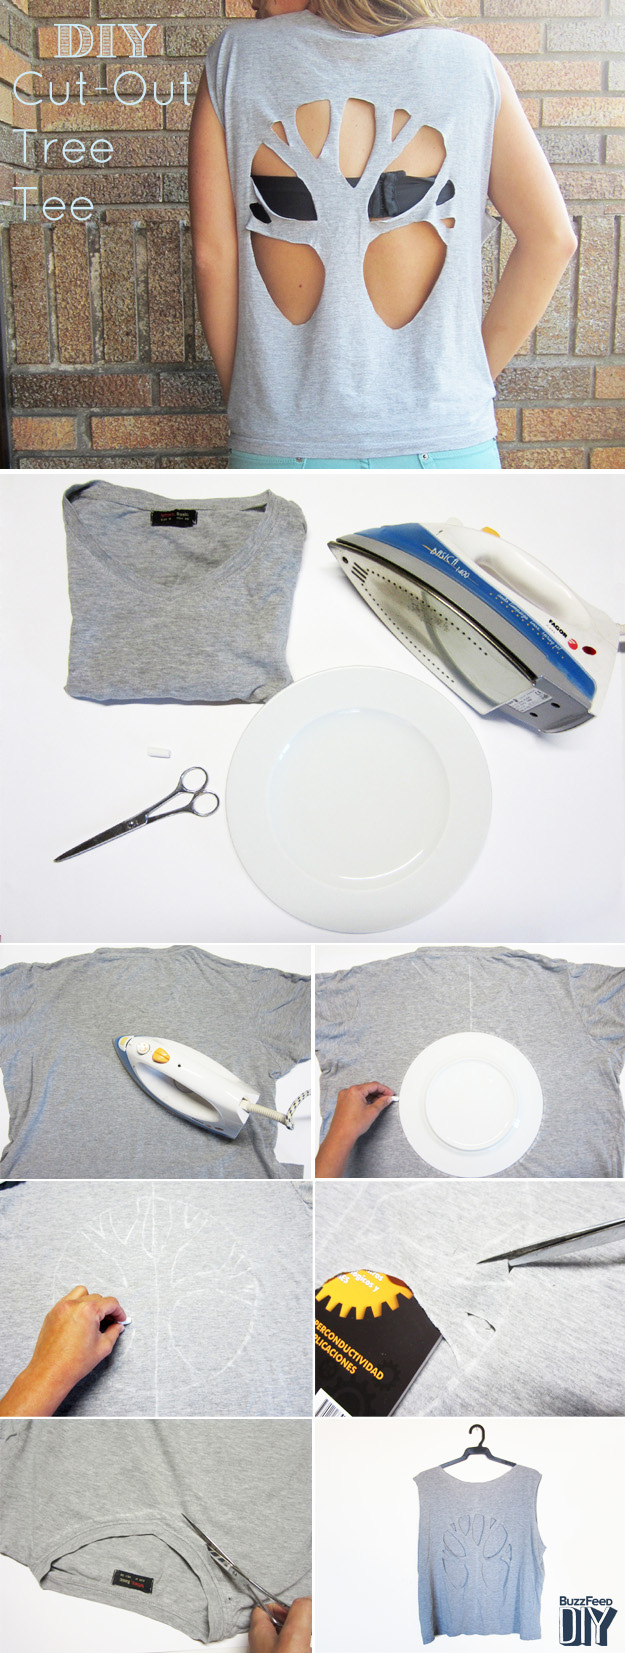 2 Cool New Ways To Cut Up A T-Shirt